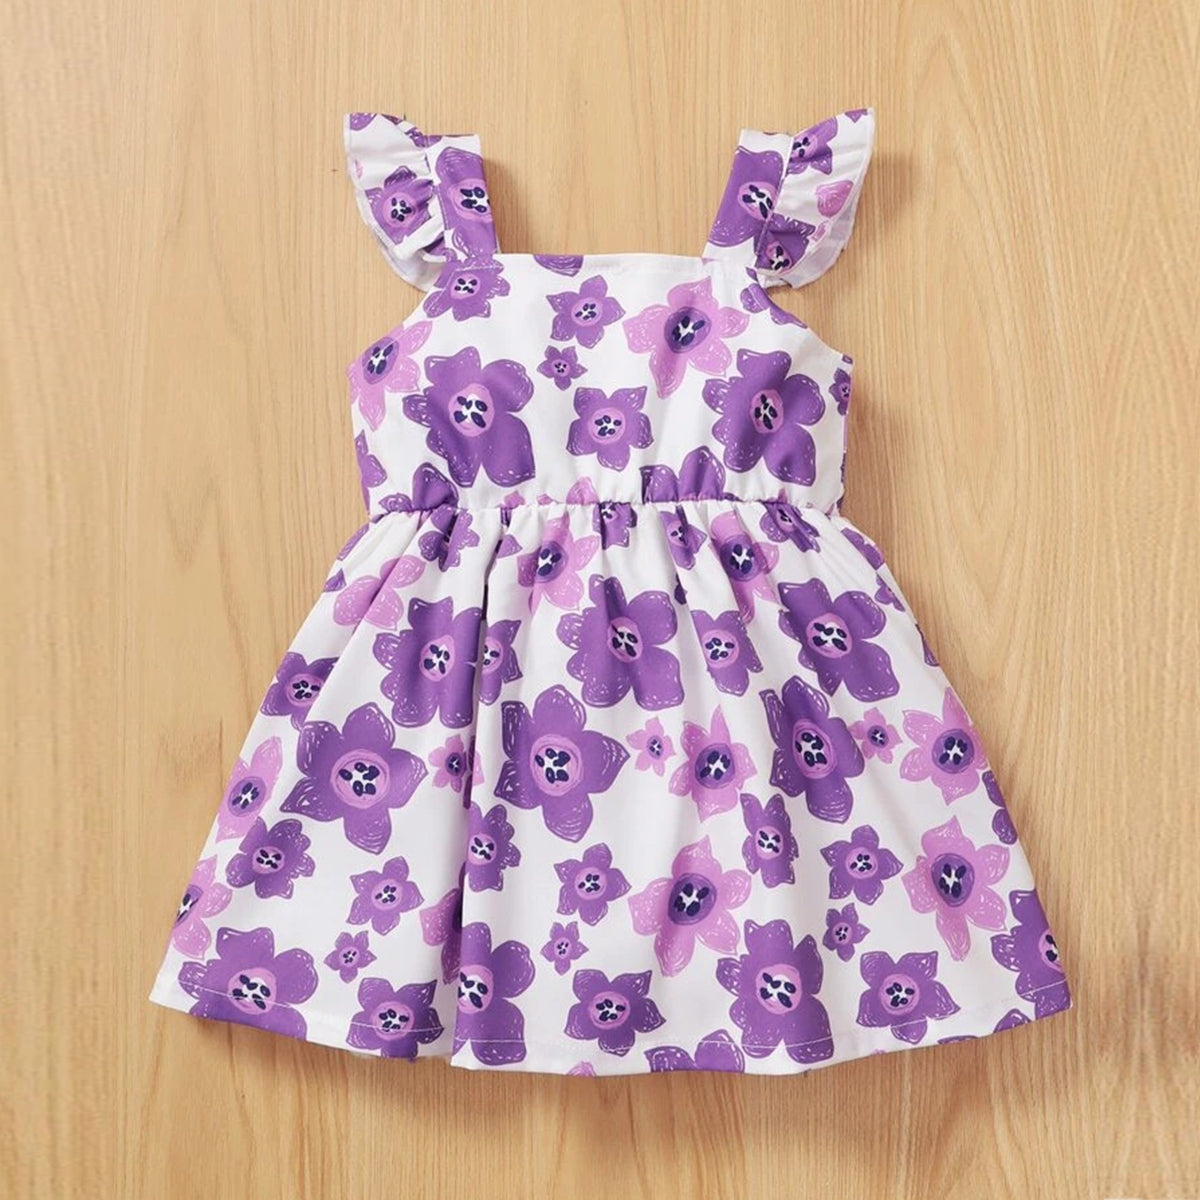 BabyGirl's Stylish Floral & White Floral Tunic Dresses_Frocks (Combo Pack Of 2) for Kids.